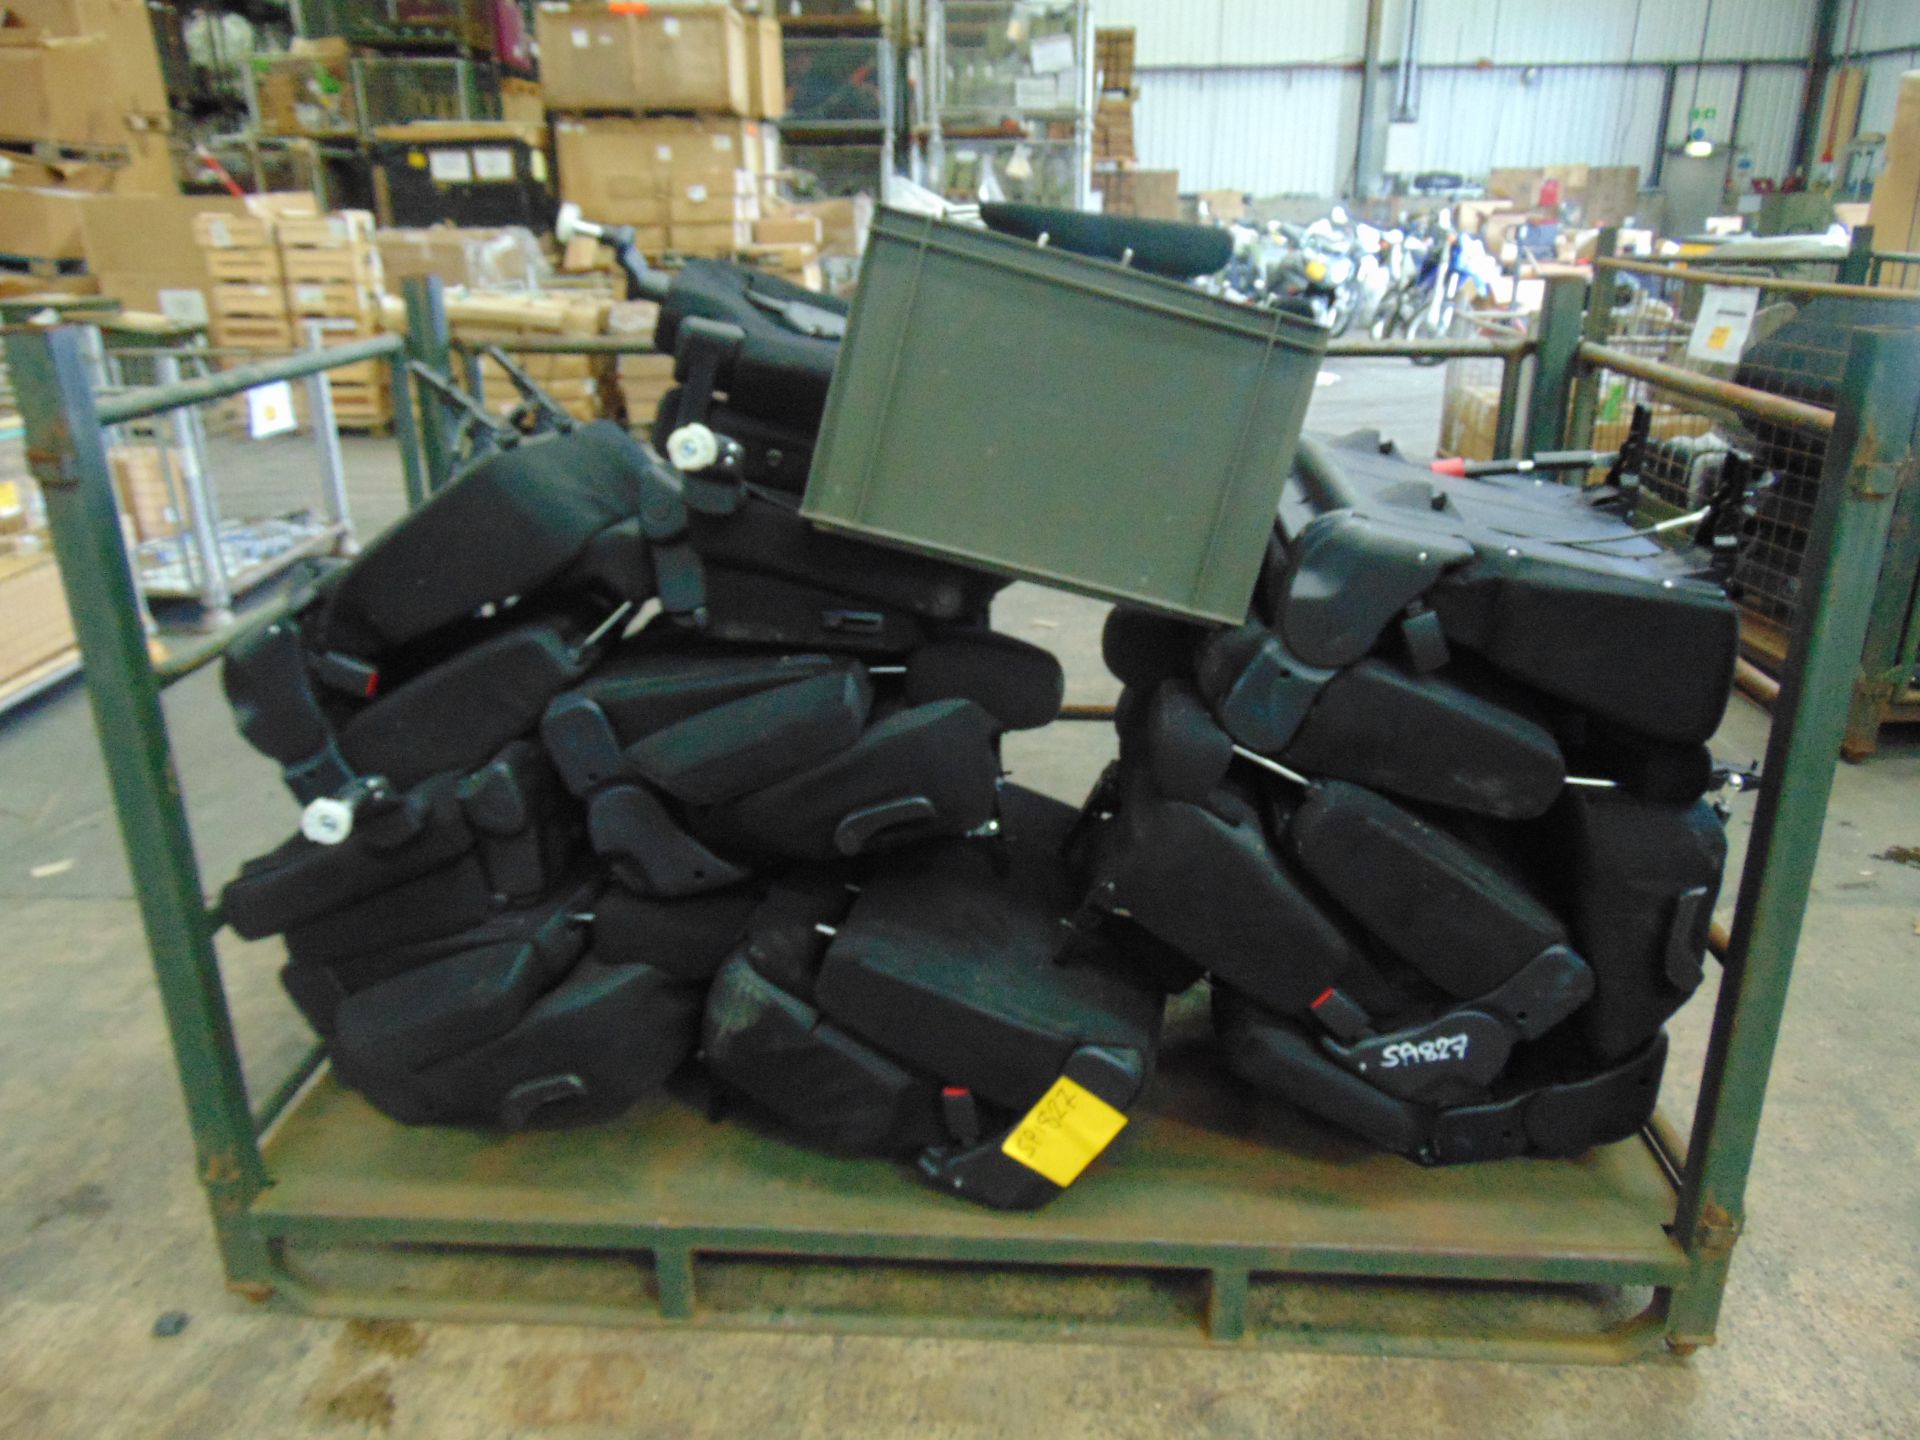 Mixed Stillage of Mitsubishi Bench Seats and Head Rests - Image 2 of 6